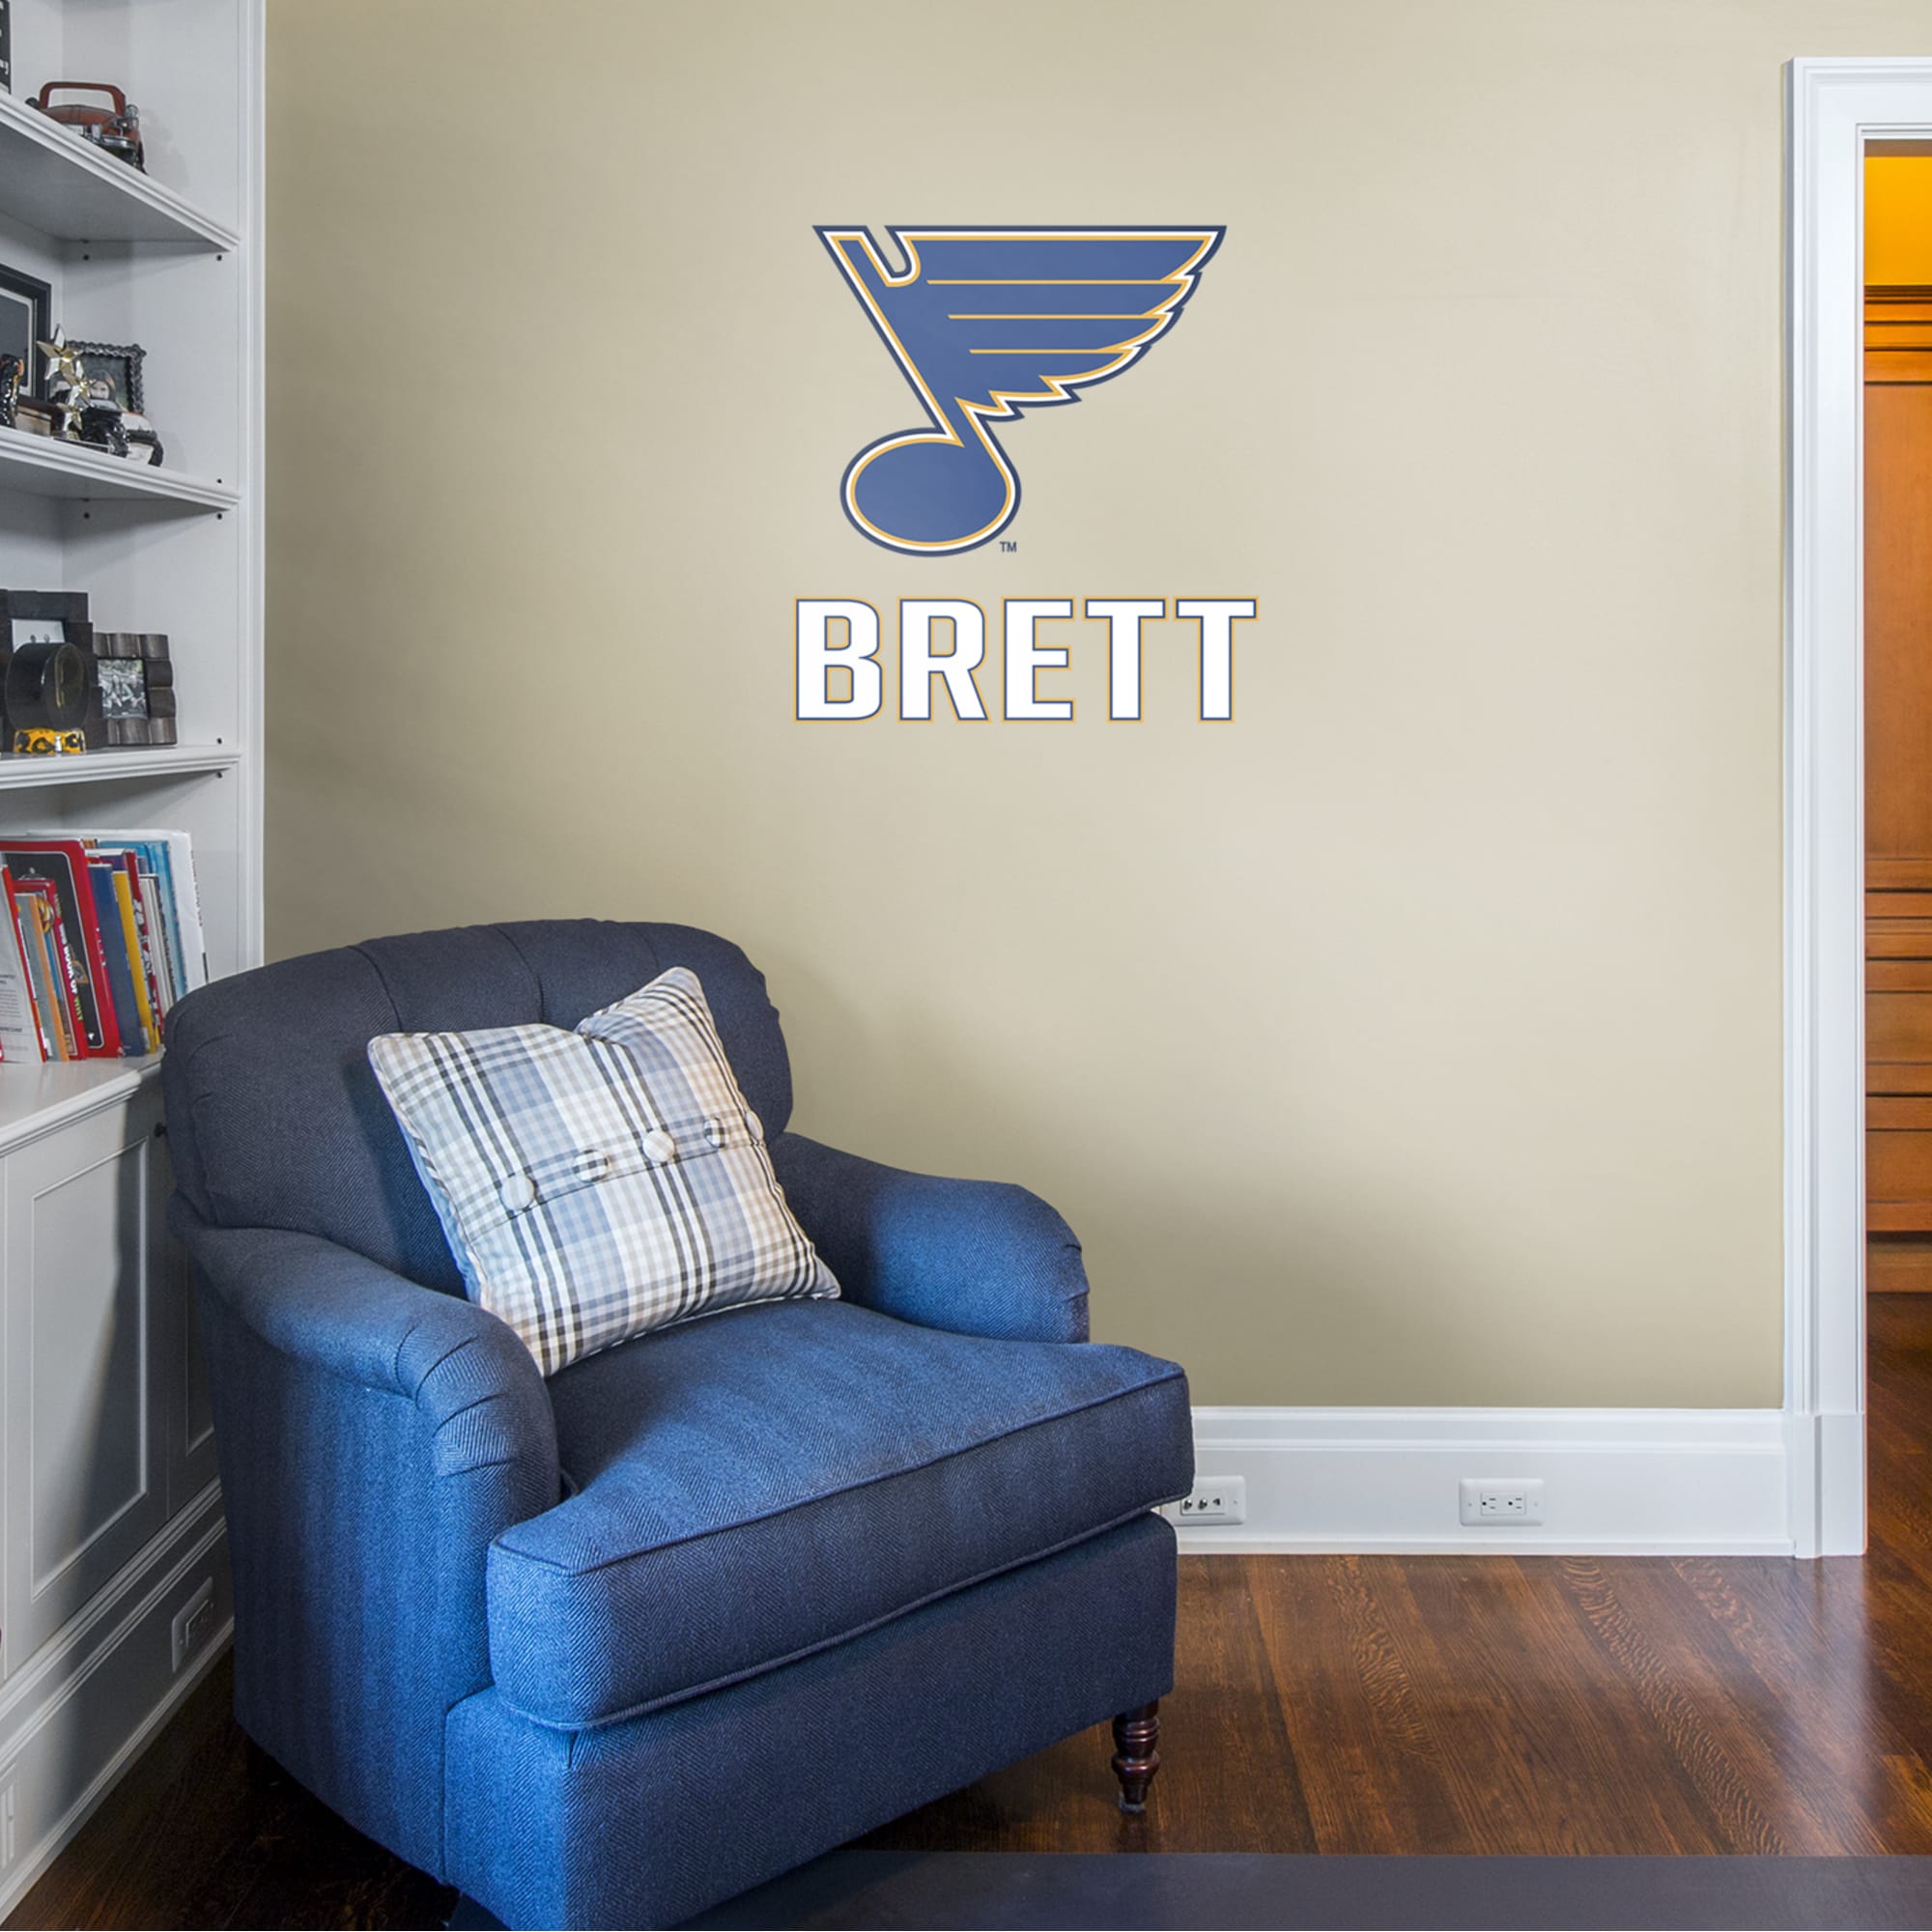 St. Louis Blues: Stacked Personalized Name - Officially Licensed NHL Transfer Decal in White (39.5"W x 52"H) by Fathead | Vinyl